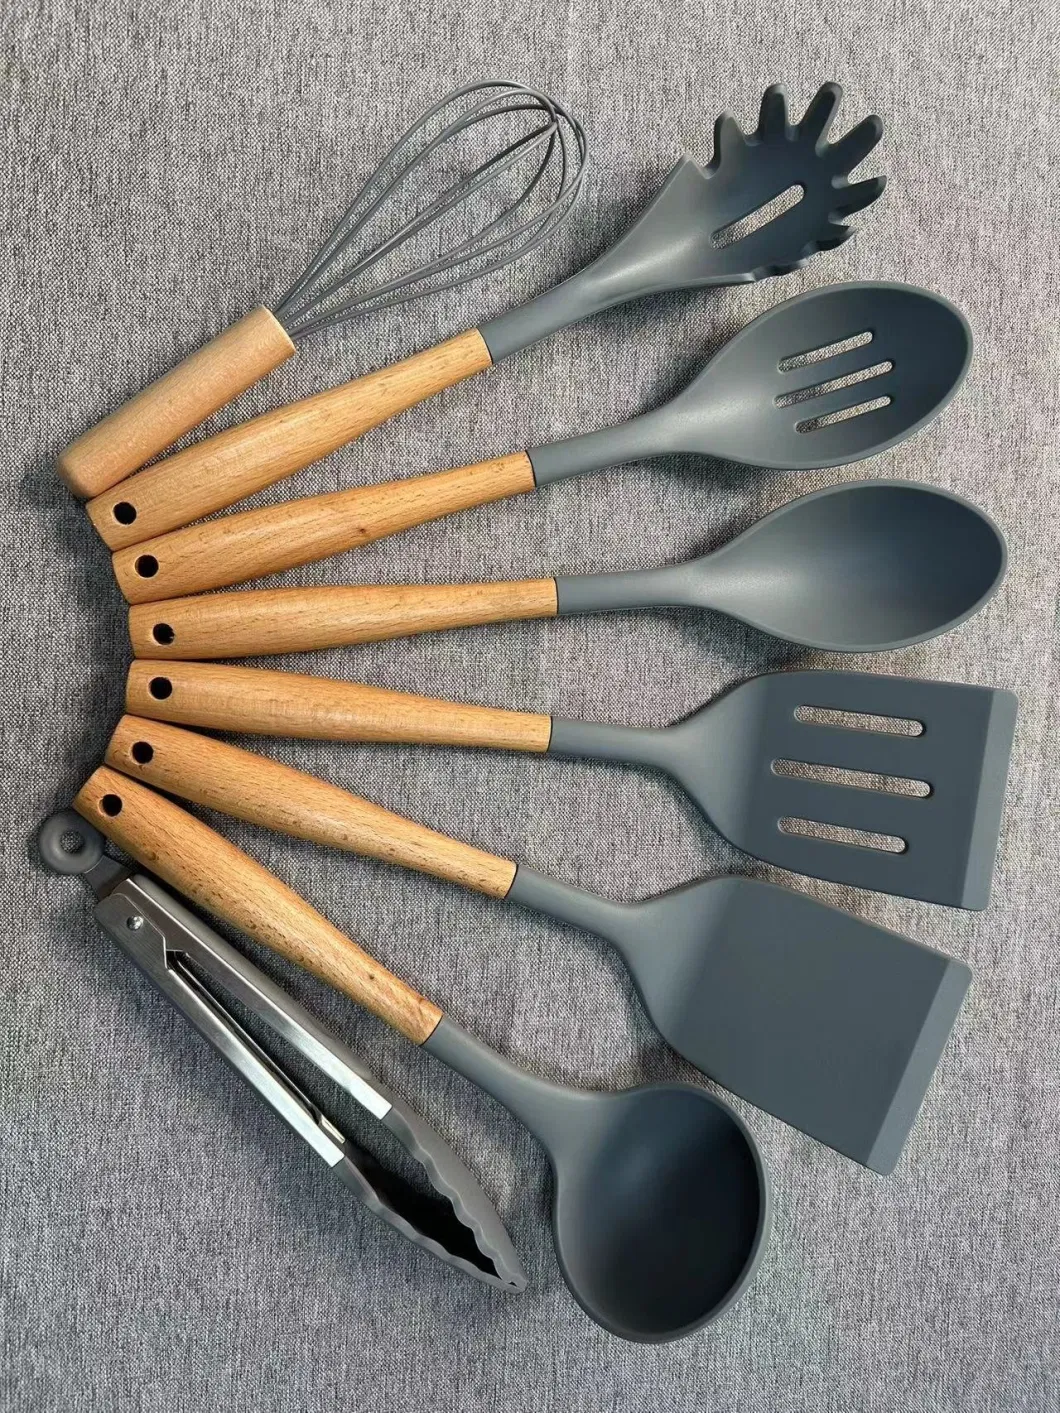 High Quality 8PCS House Gadgets Wooden Handle Cooking Kitchen Utensils Tools Set